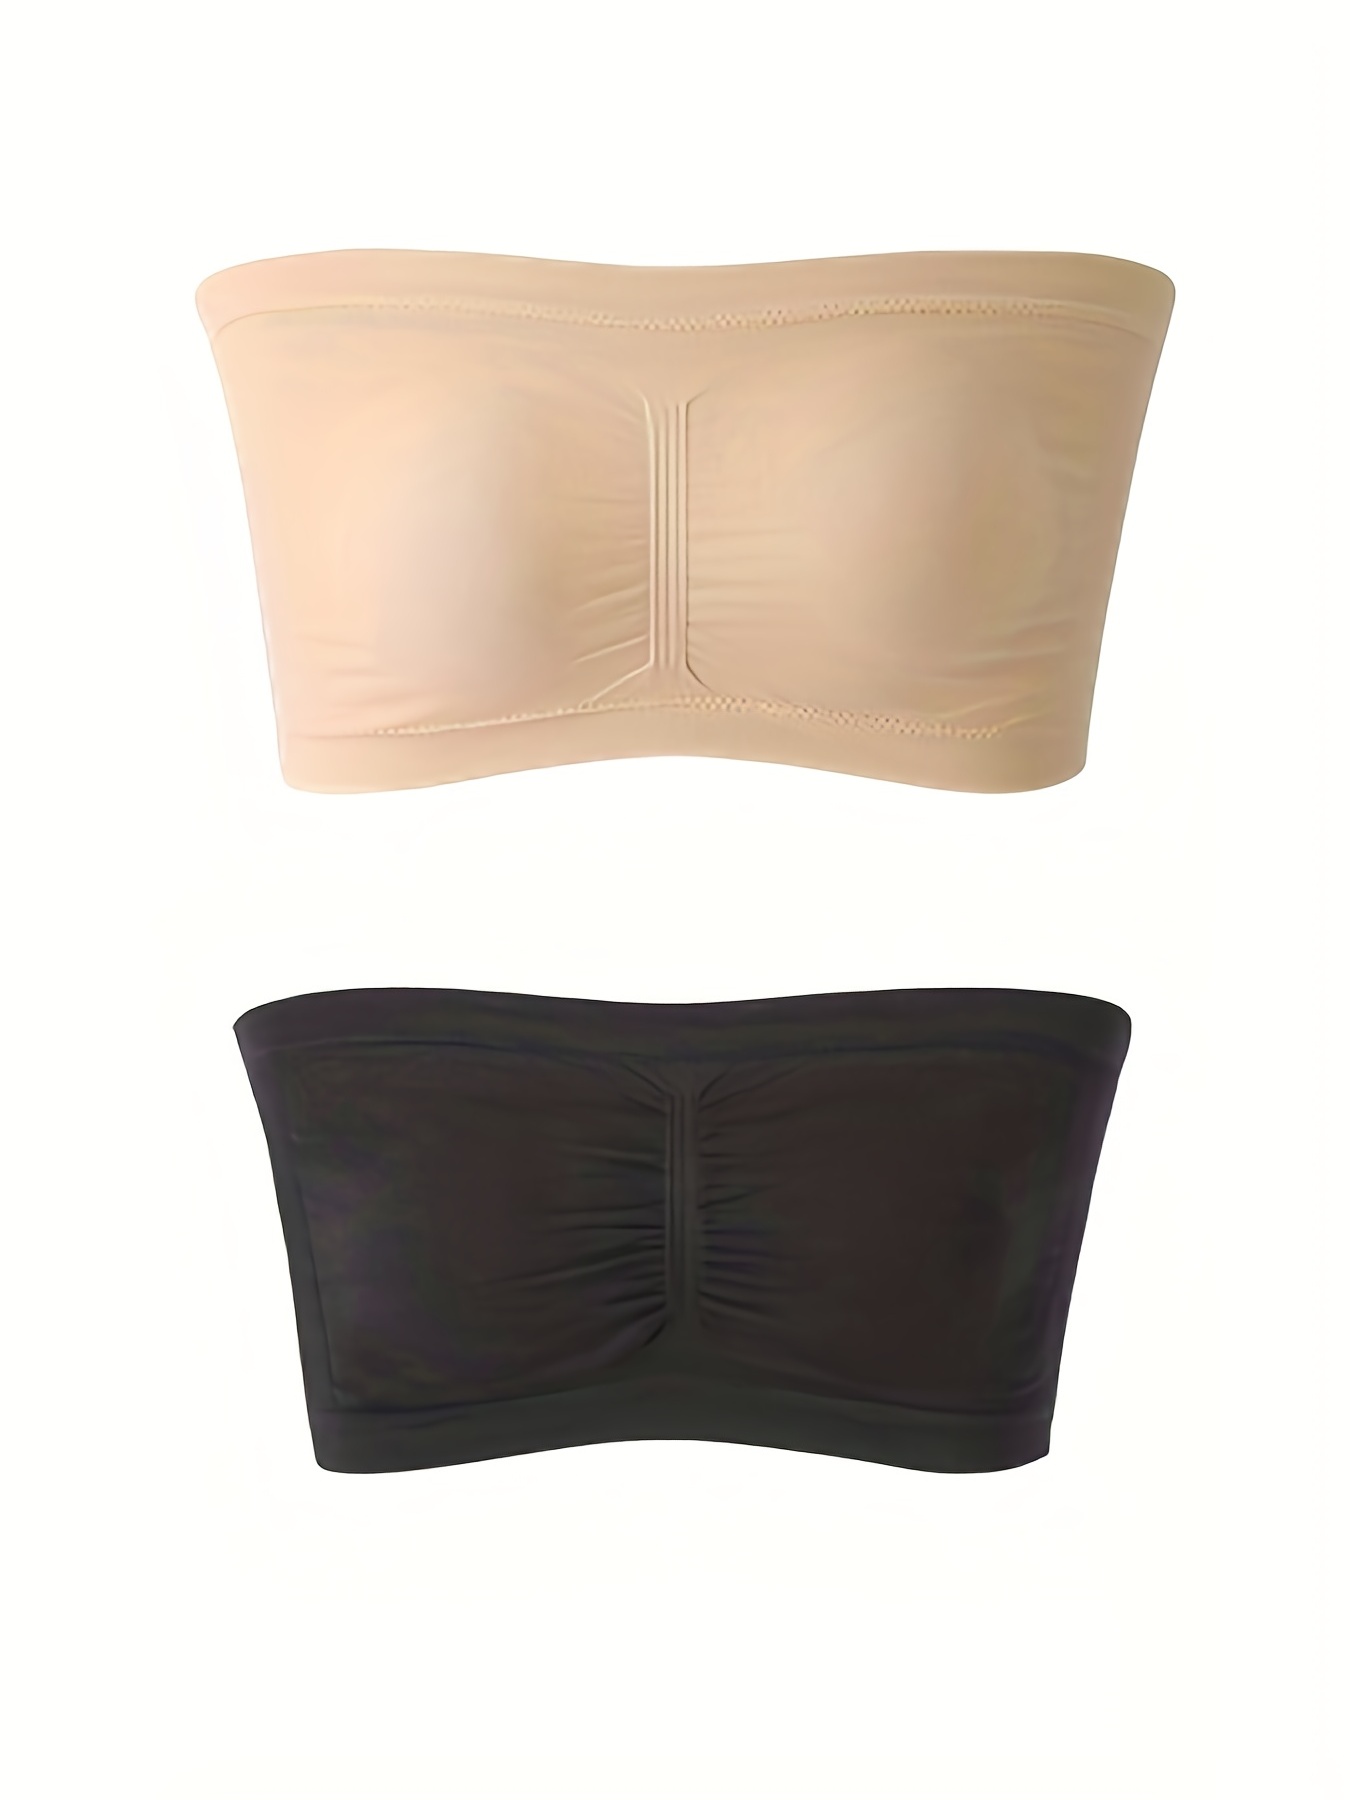 Women Strapless Padded Bra, Seamless Stretchy Tube Top, Breathable & Comfort